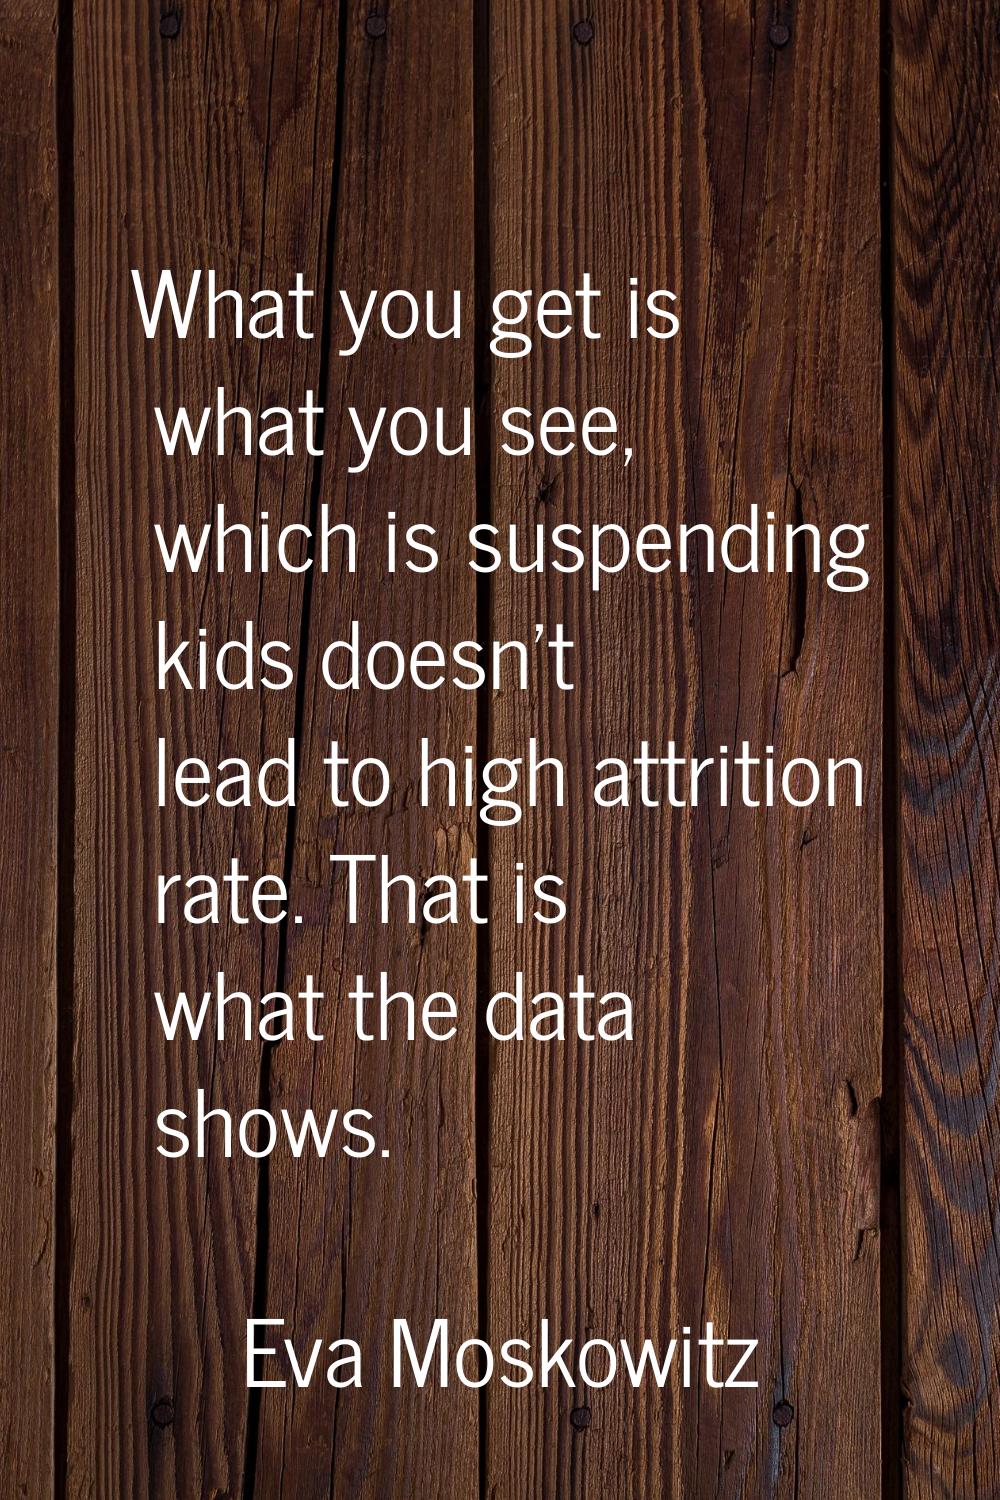 What you get is what you see, which is suspending kids doesn't lead to high attrition rate. That is